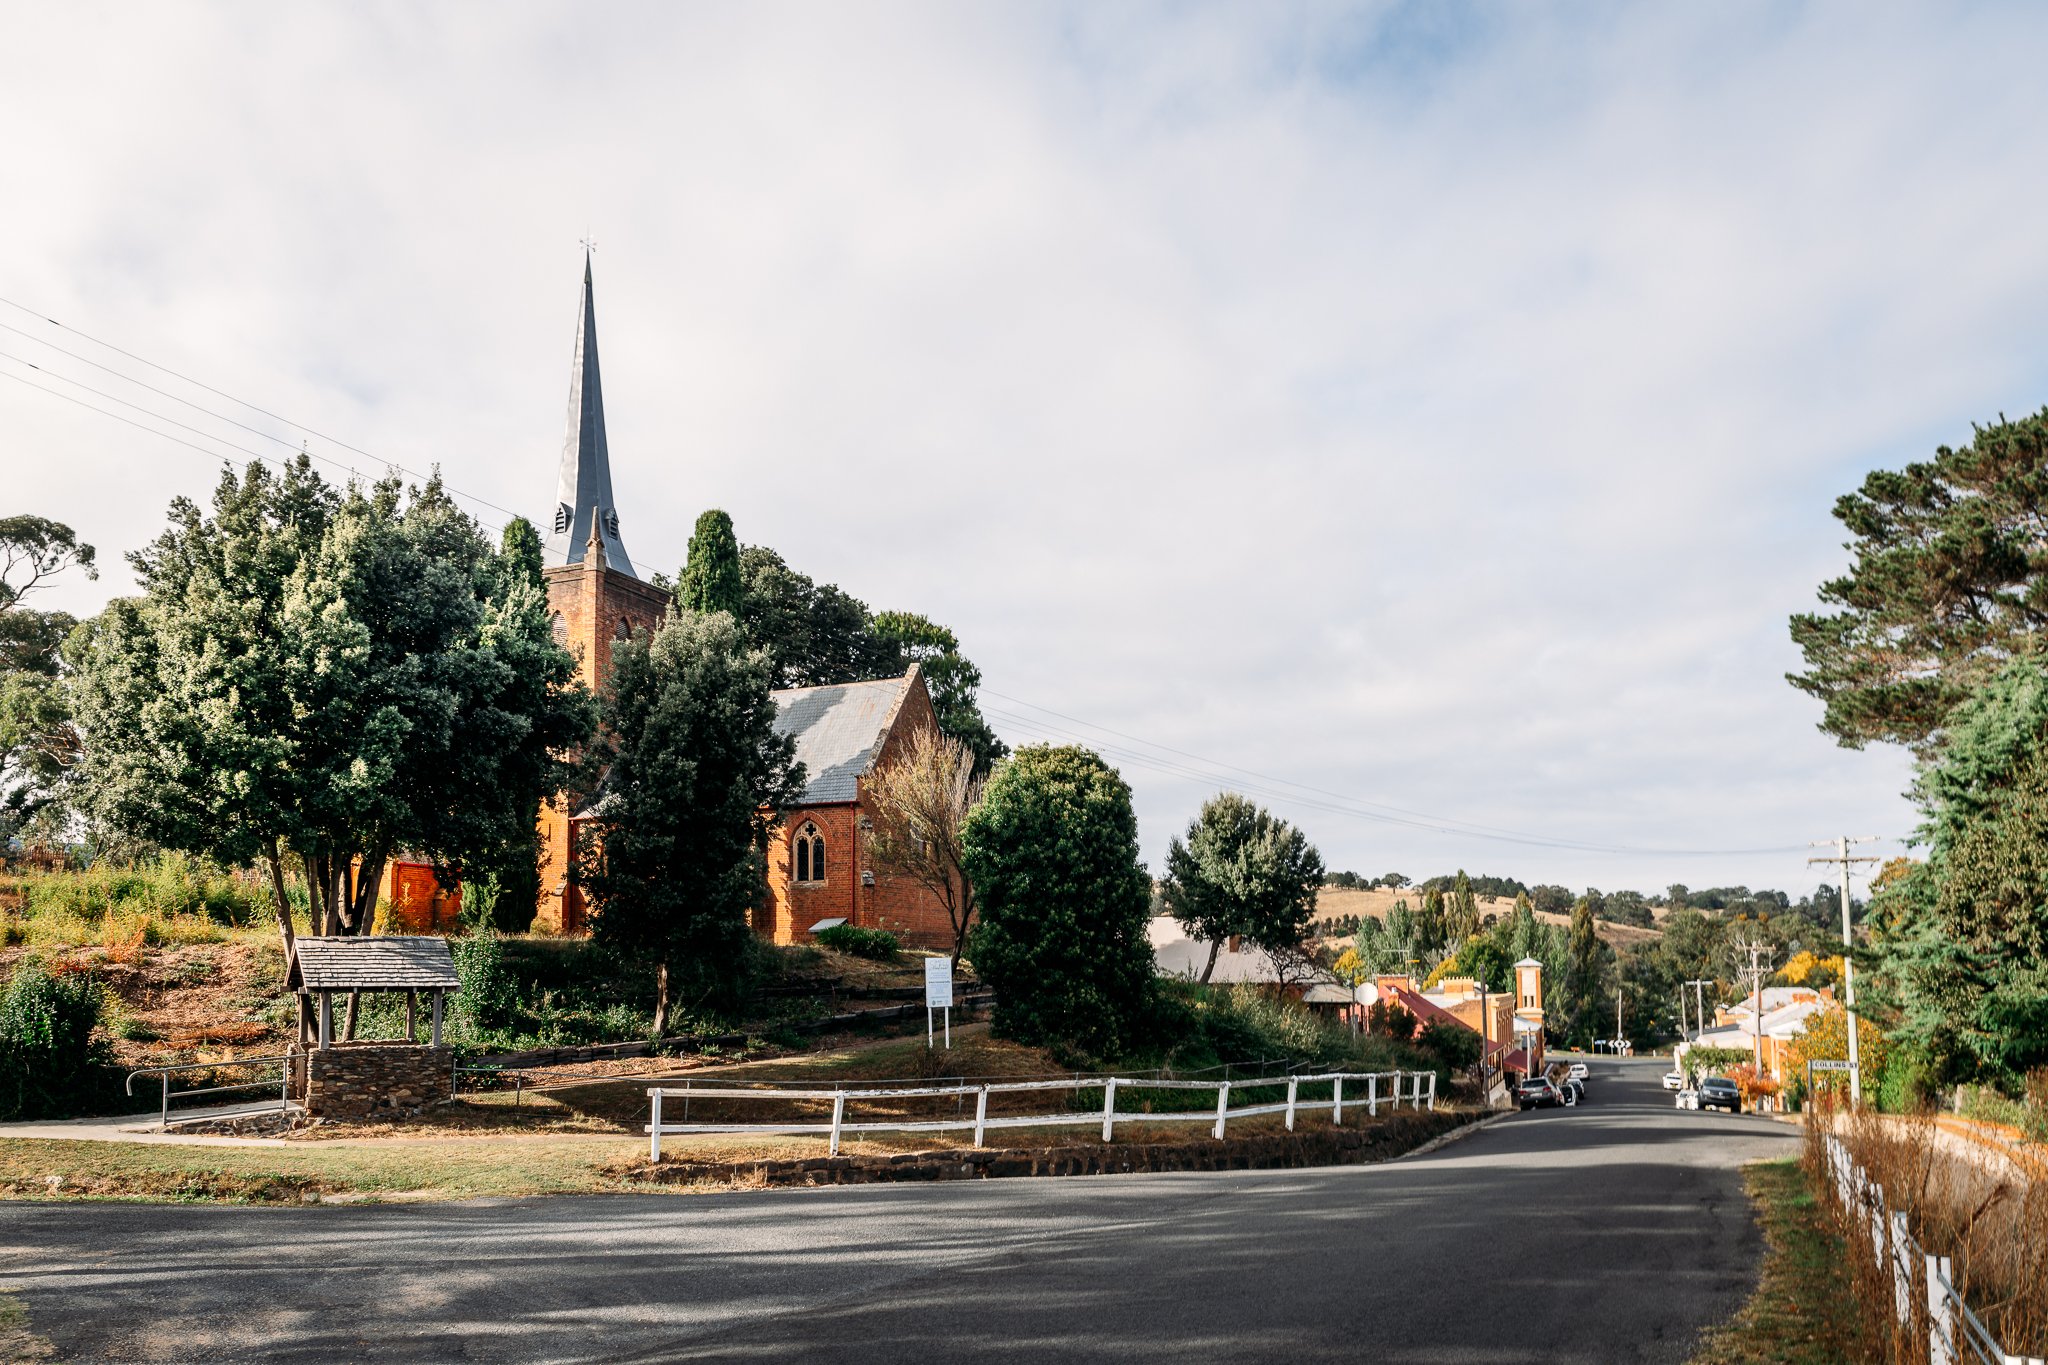 1 Movie set entrance to Carcoar village with St Paul's Anglican Church 1845 @timbean_photography MEDIA.jpg